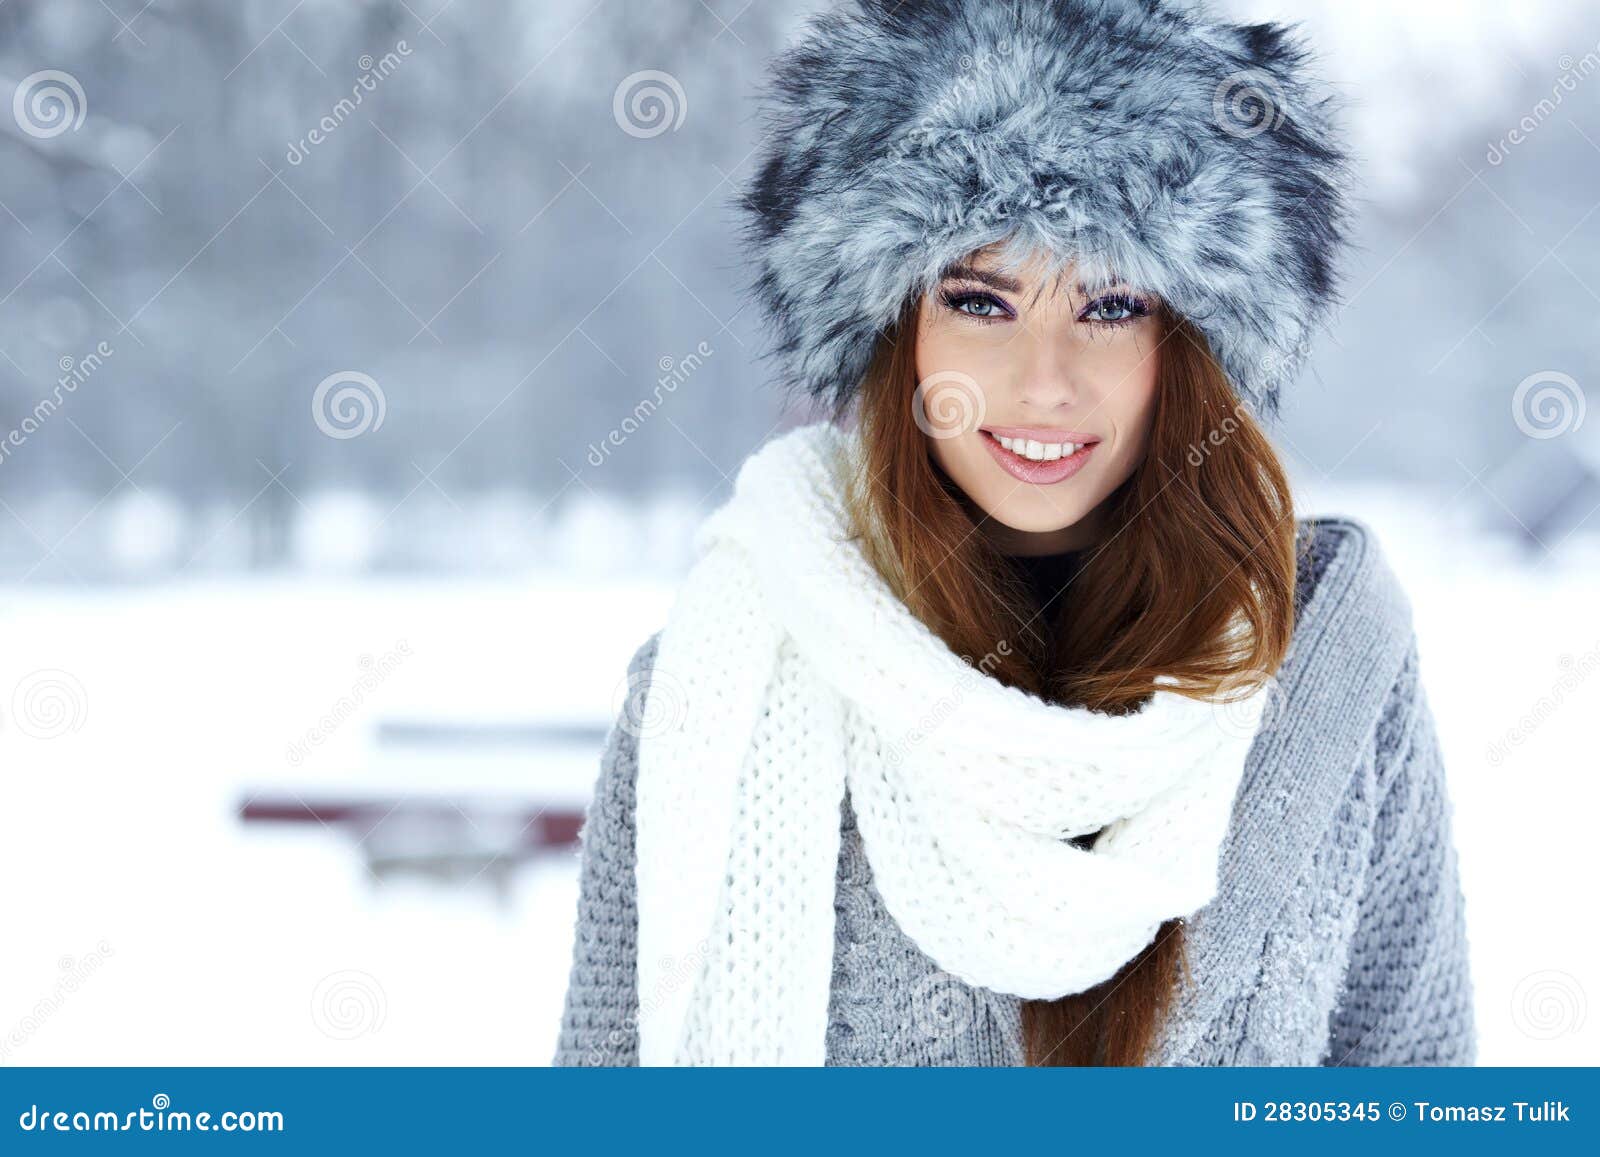 Brunette Girl I Winter Clothes Stock Image - Image of pink, cute: 28305345